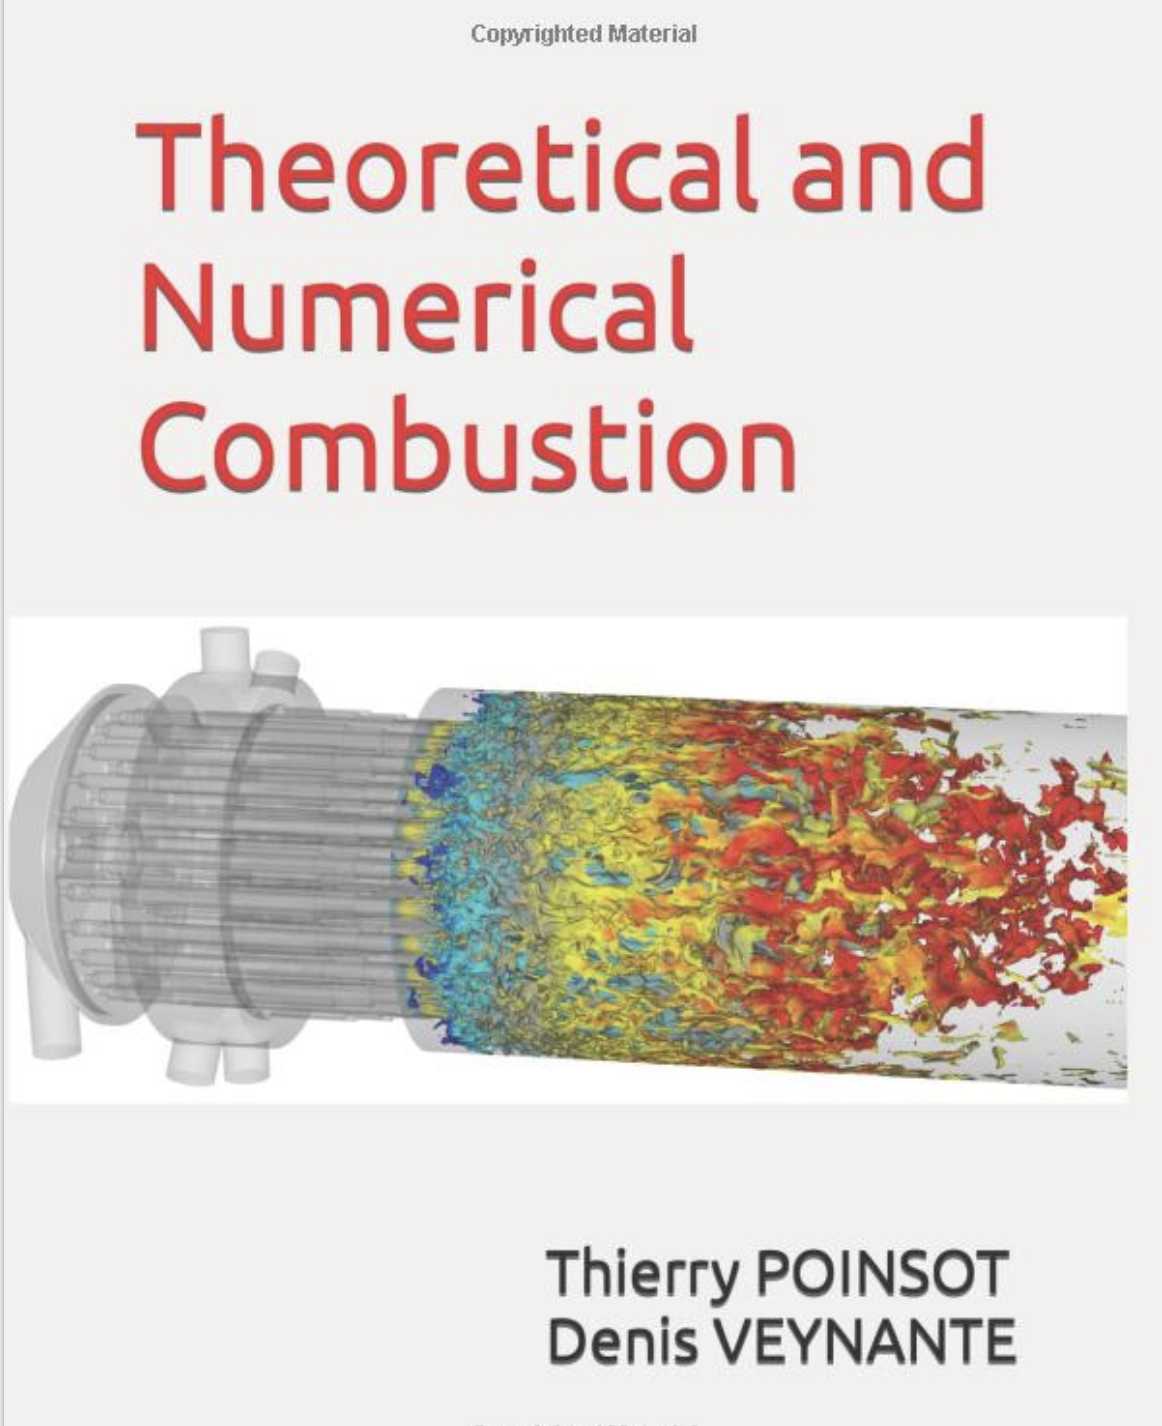 Theoretical and numerical combustion. Buy textbook here: